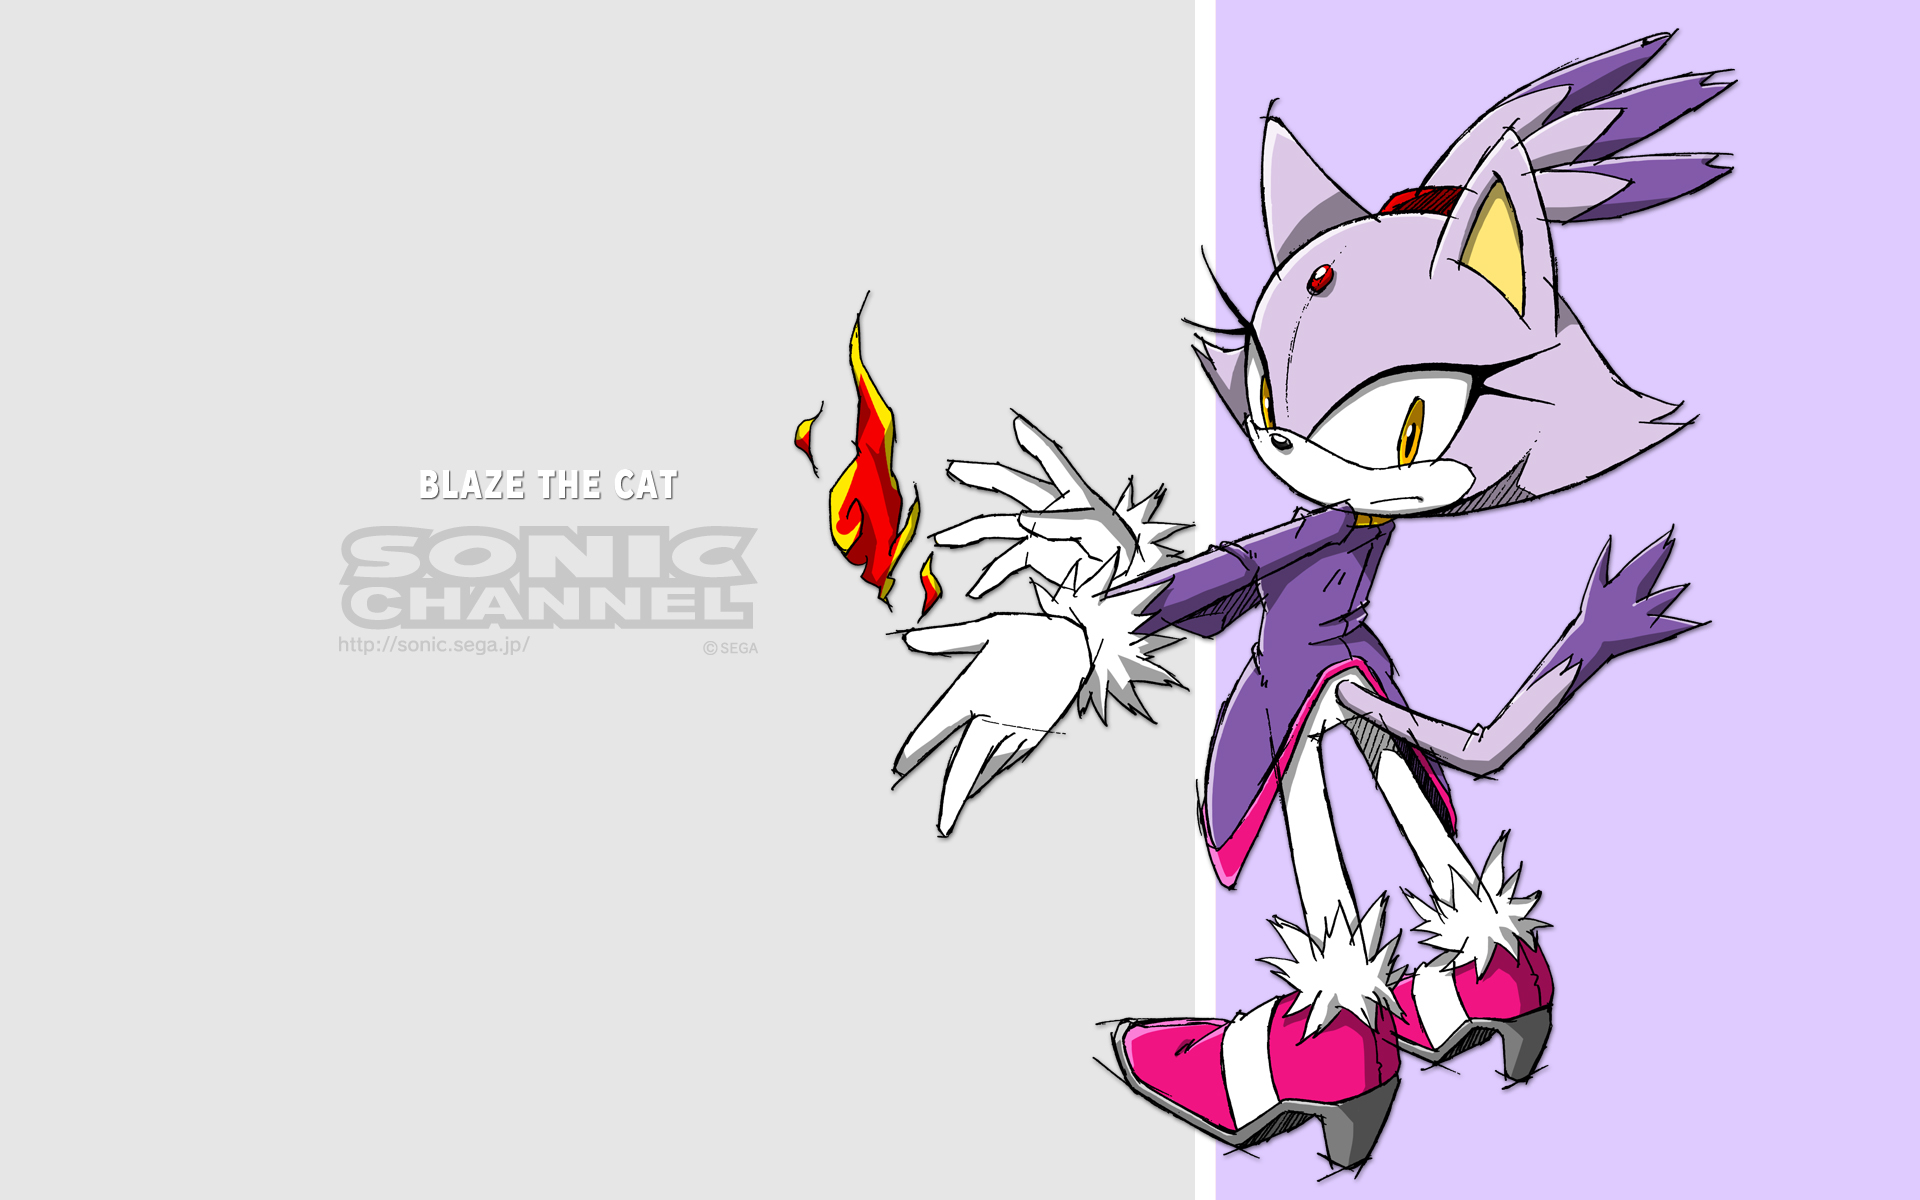 video game, sonic the hedgehog, blaze the cat, sonic channel, sonic